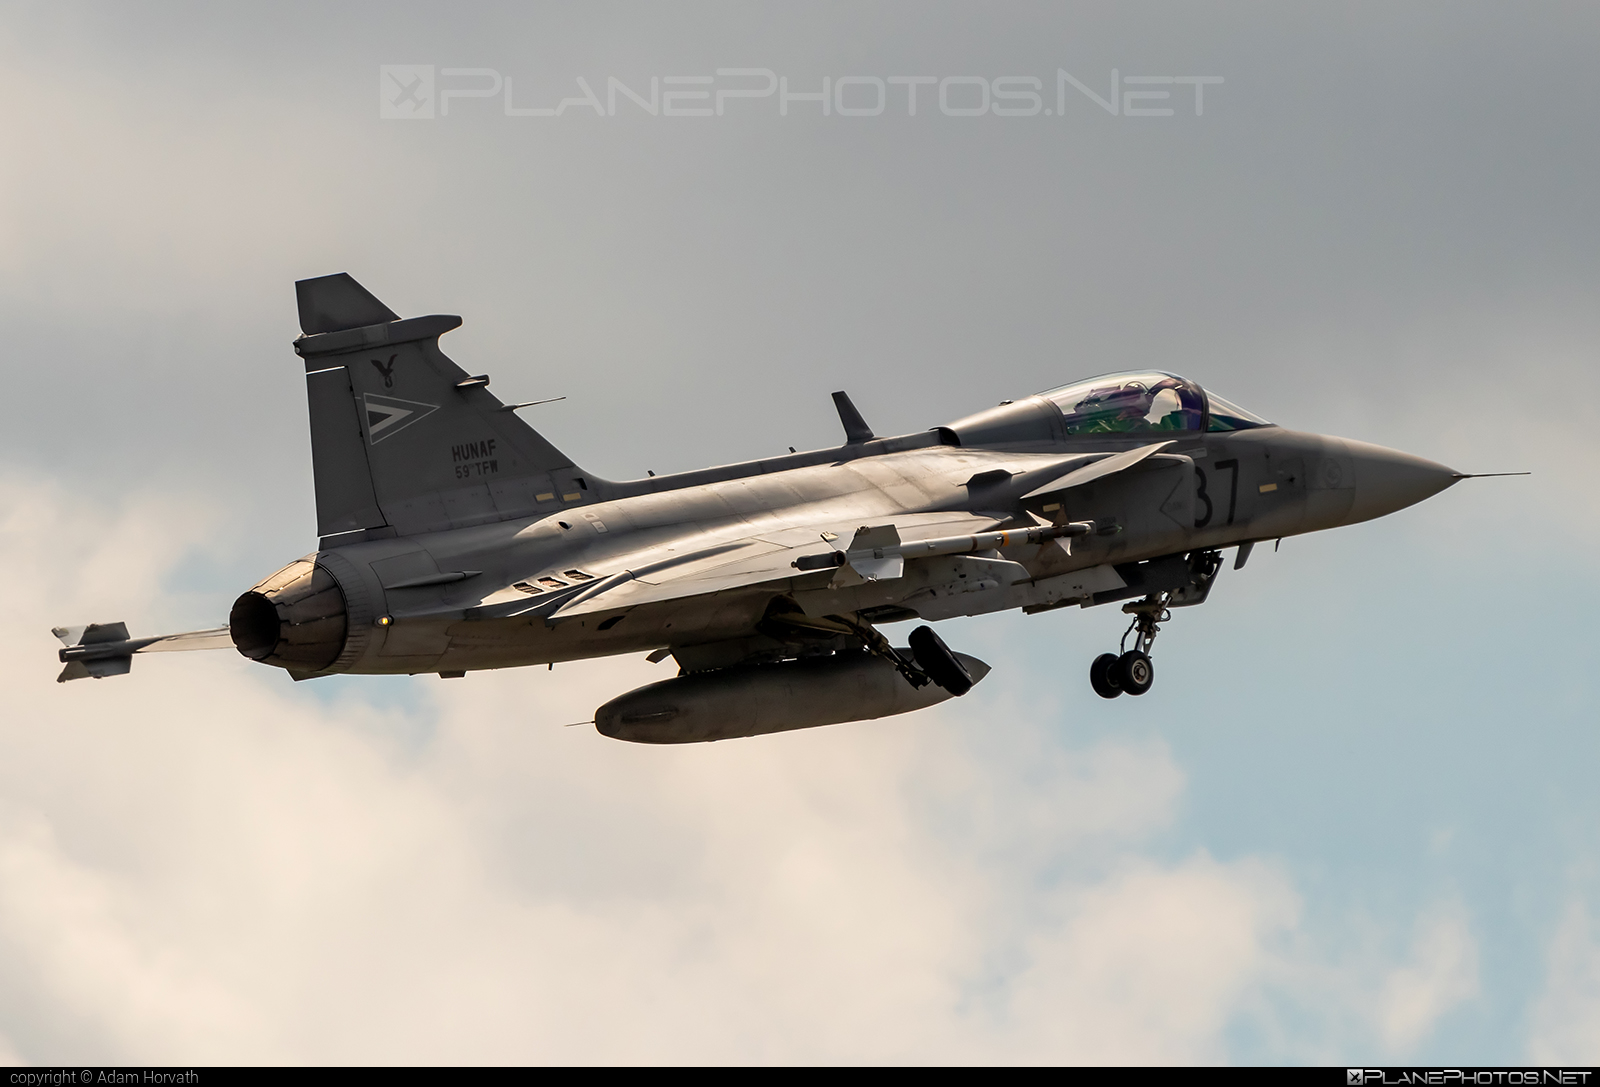 Saab JAS 39C Gripen - 37 operated by Magyar Légierő (Hungarian Air Force) #gripen #hungarianairforce #jas39 #jas39c #jas39gripen #magyarlegiero #saab